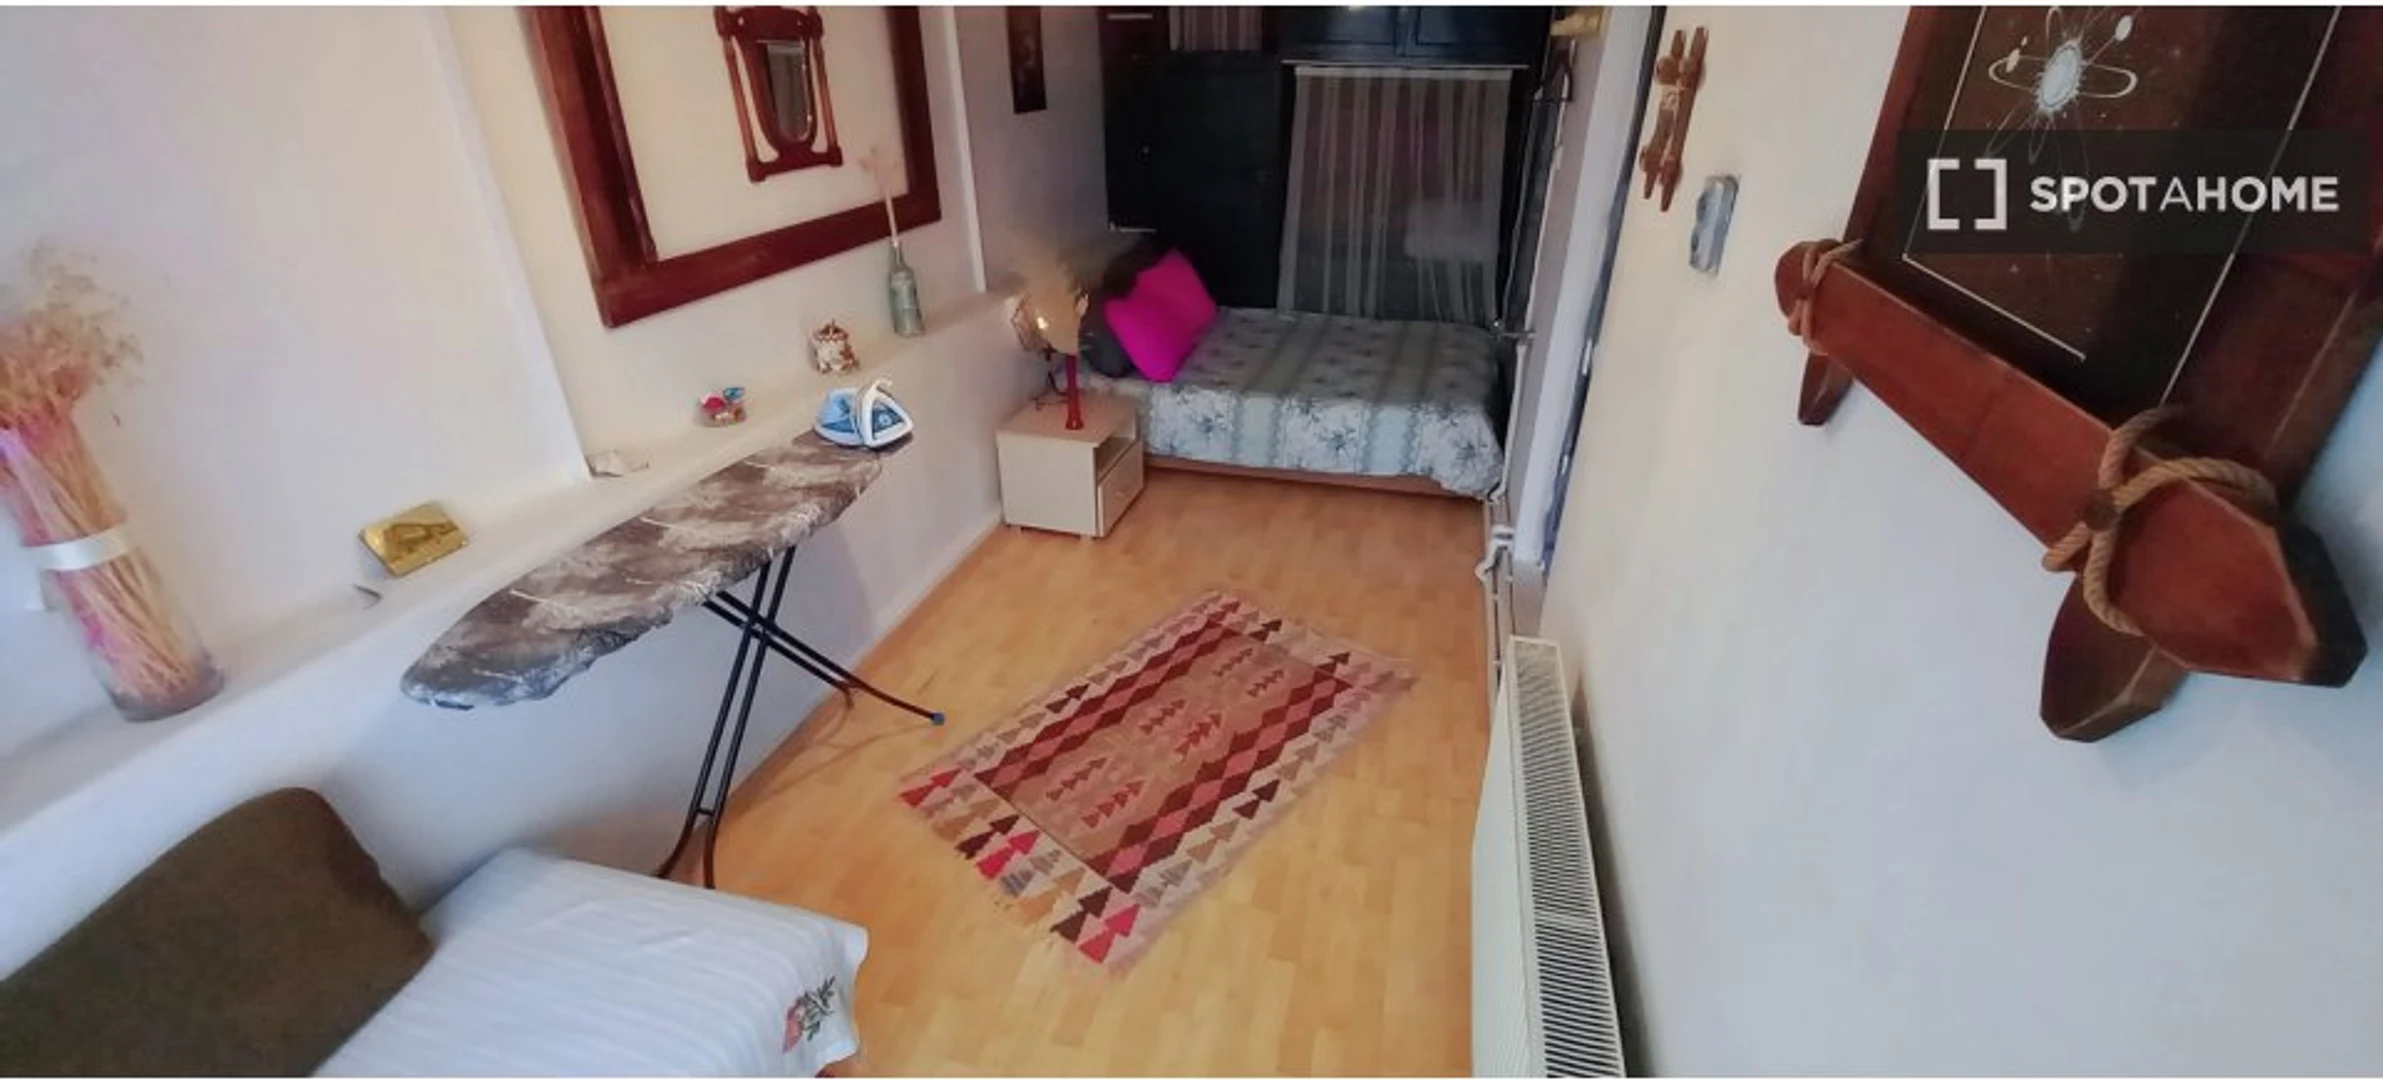 Room for rent in a shared flat in Istanbul